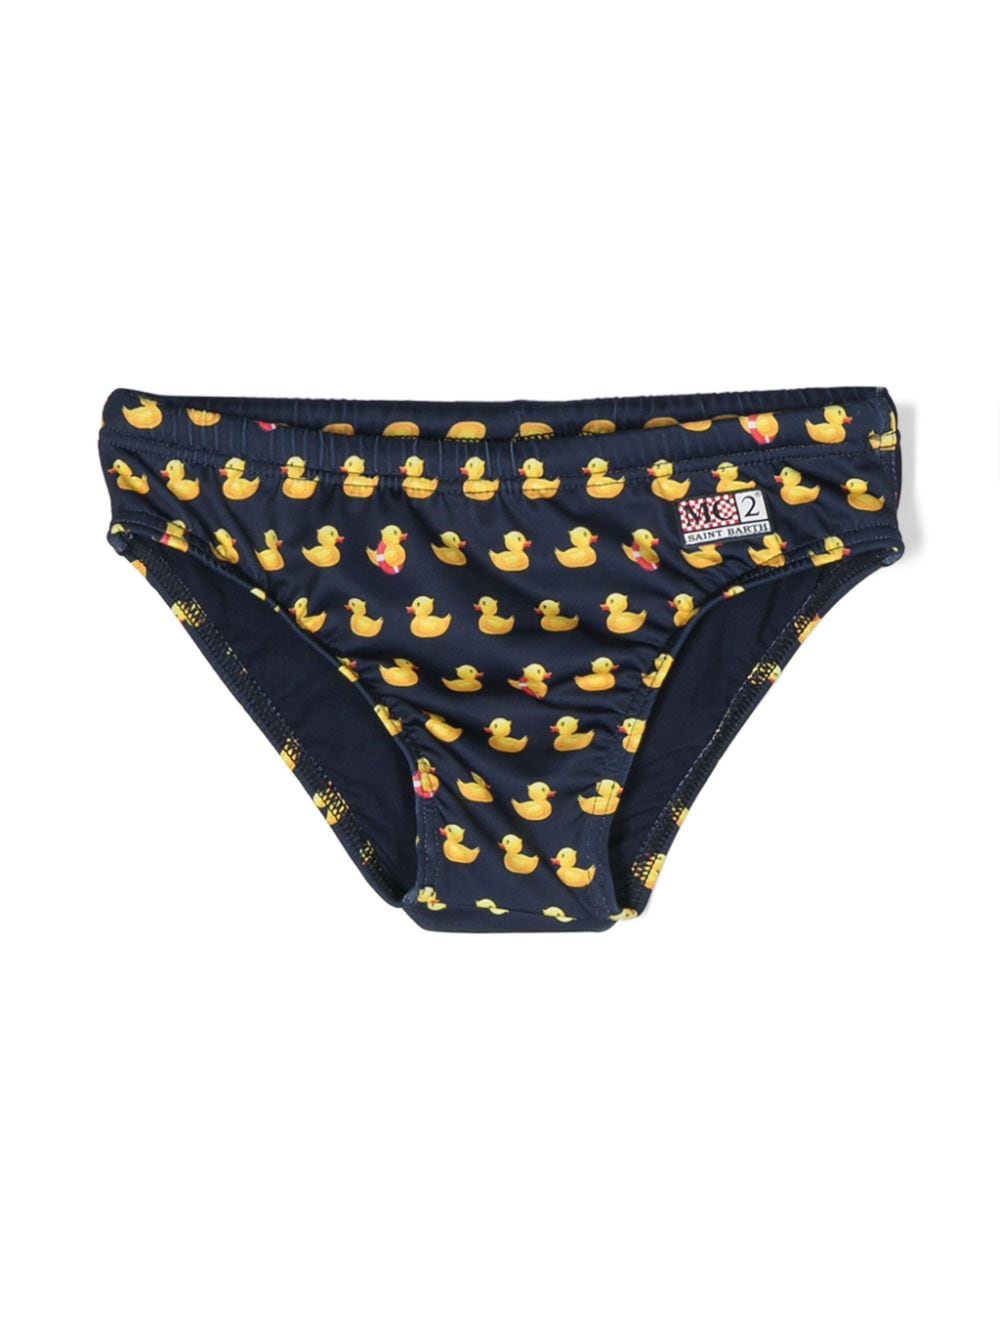 Swim briefs for boys with duck print